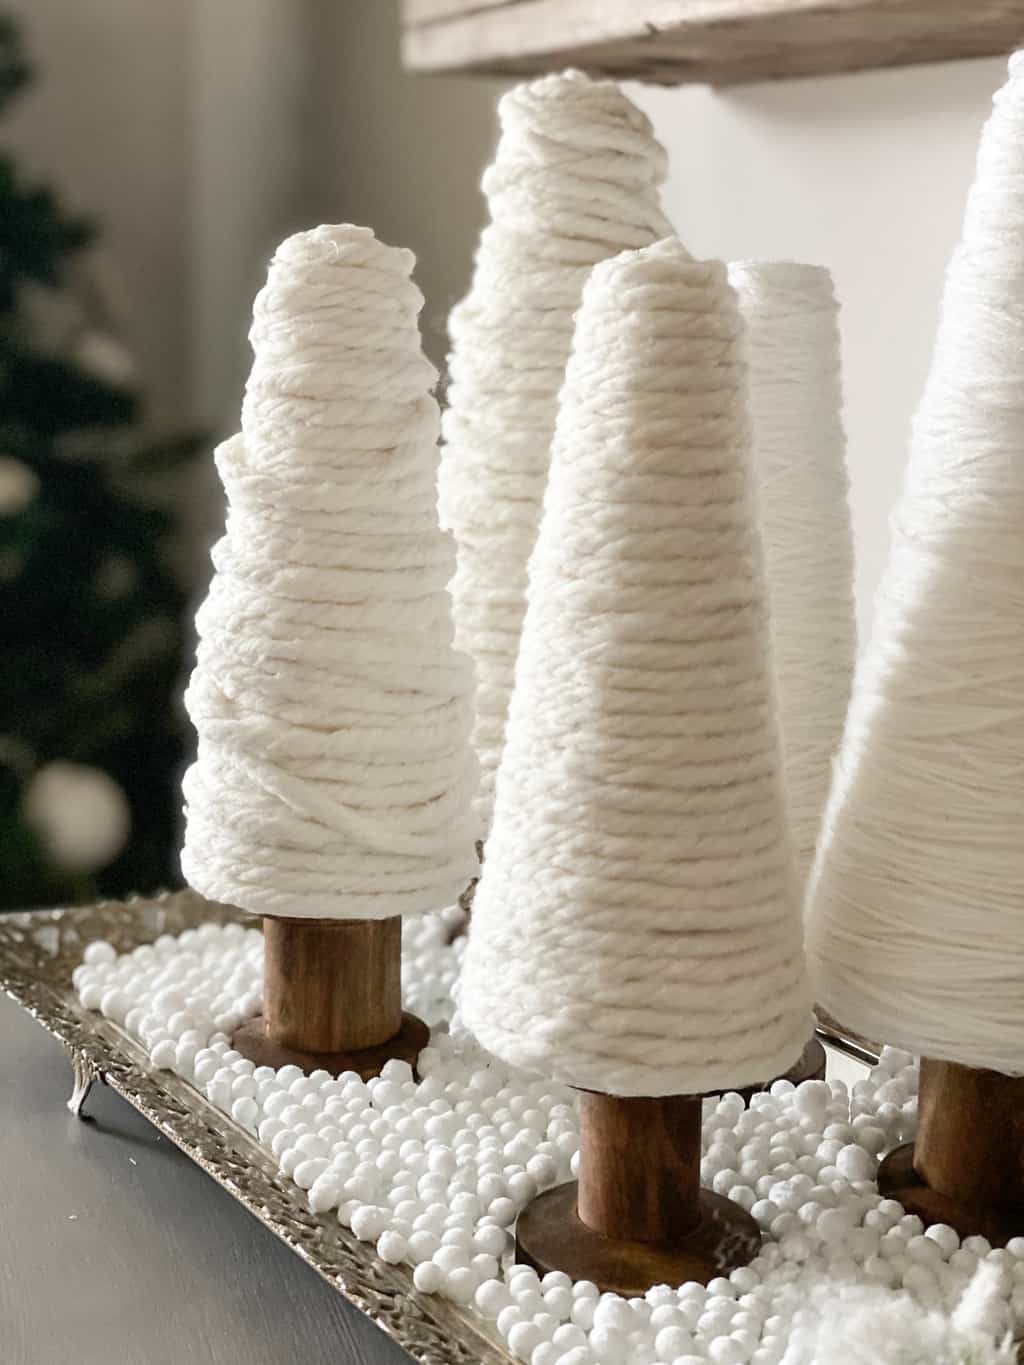 Christmas trees come in all shapes, sizes and colors, but these upcycled ribbon spool Christmas trees might be the cutest ones of all.